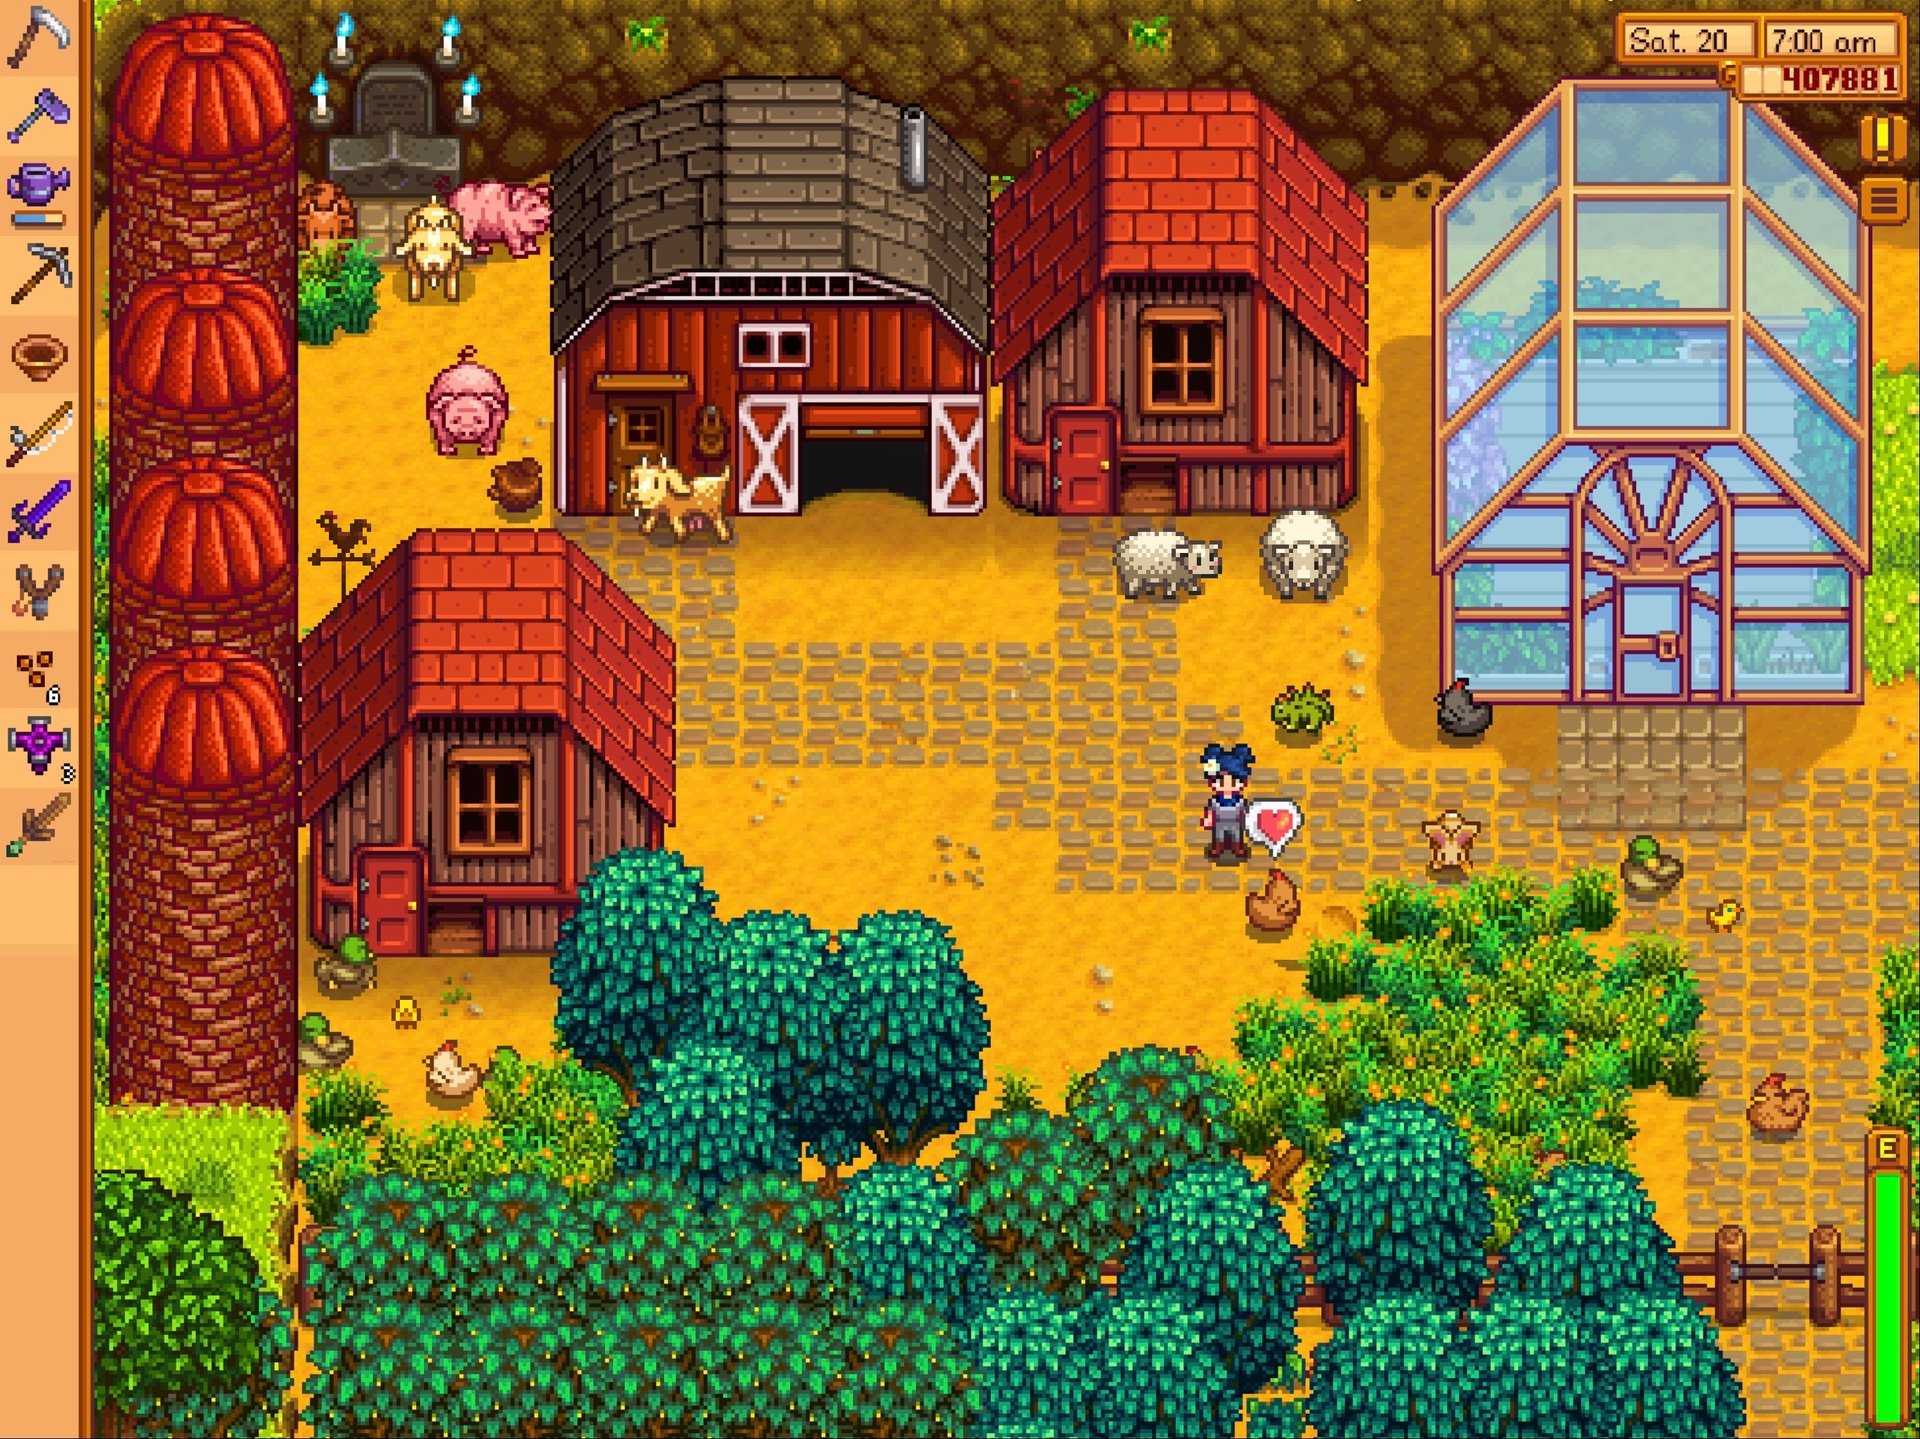 Where to find the purple shorts in stardew valley